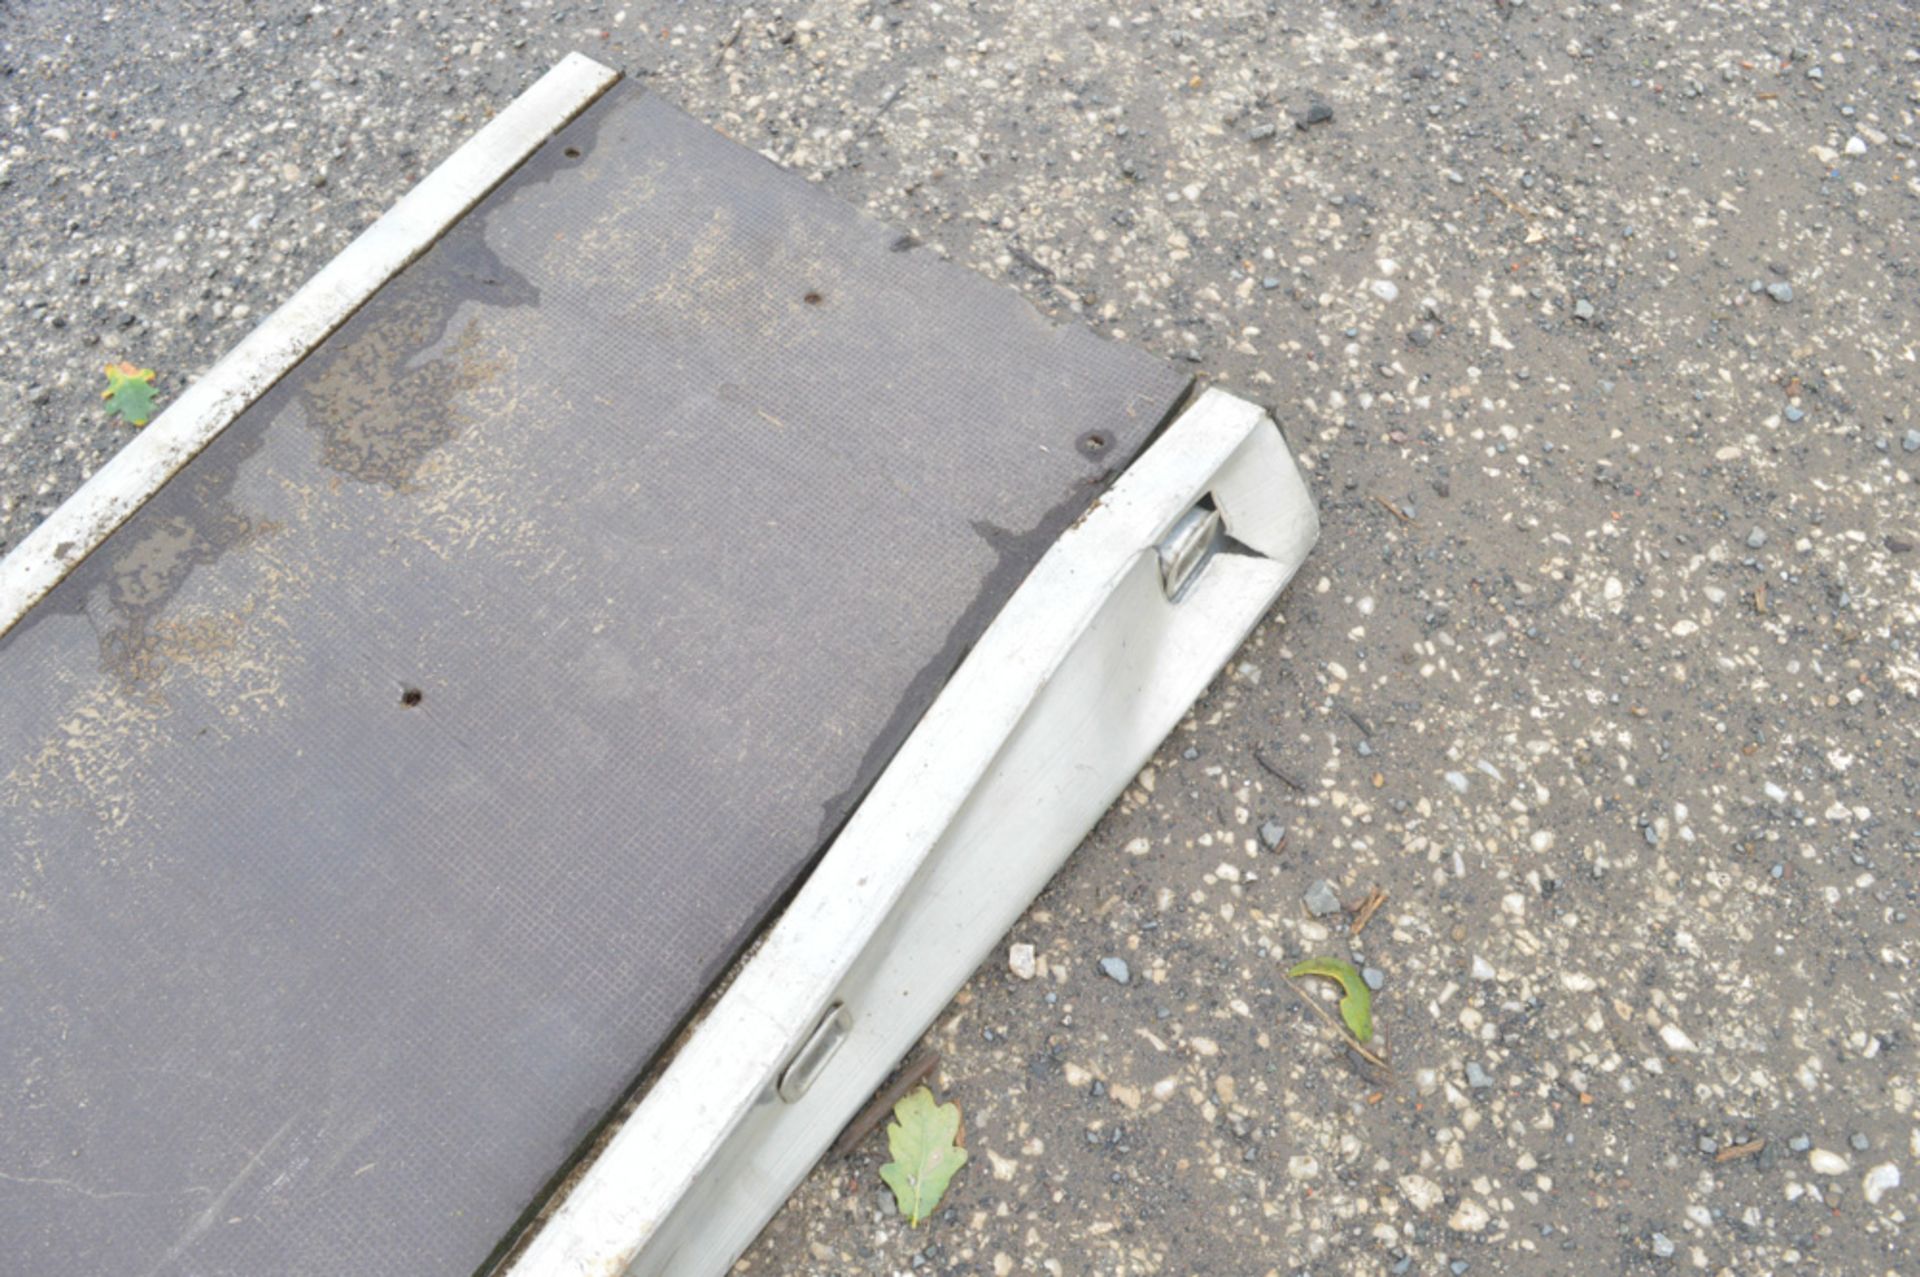 23ft aluminium staging board **Damaged** A633171 - Image 2 of 2